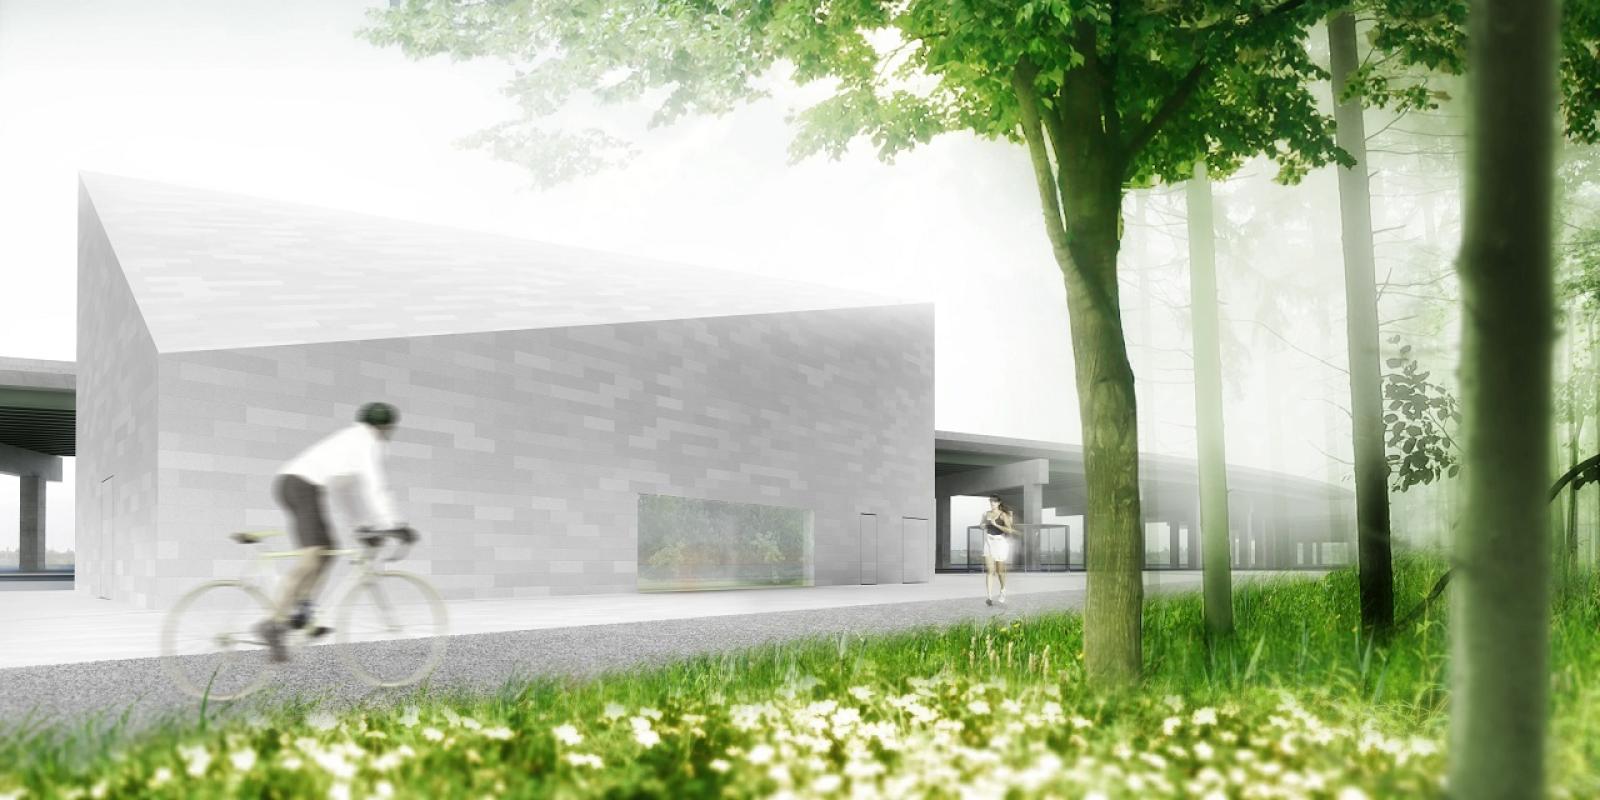 rendering of a someone cycling past a concrete building